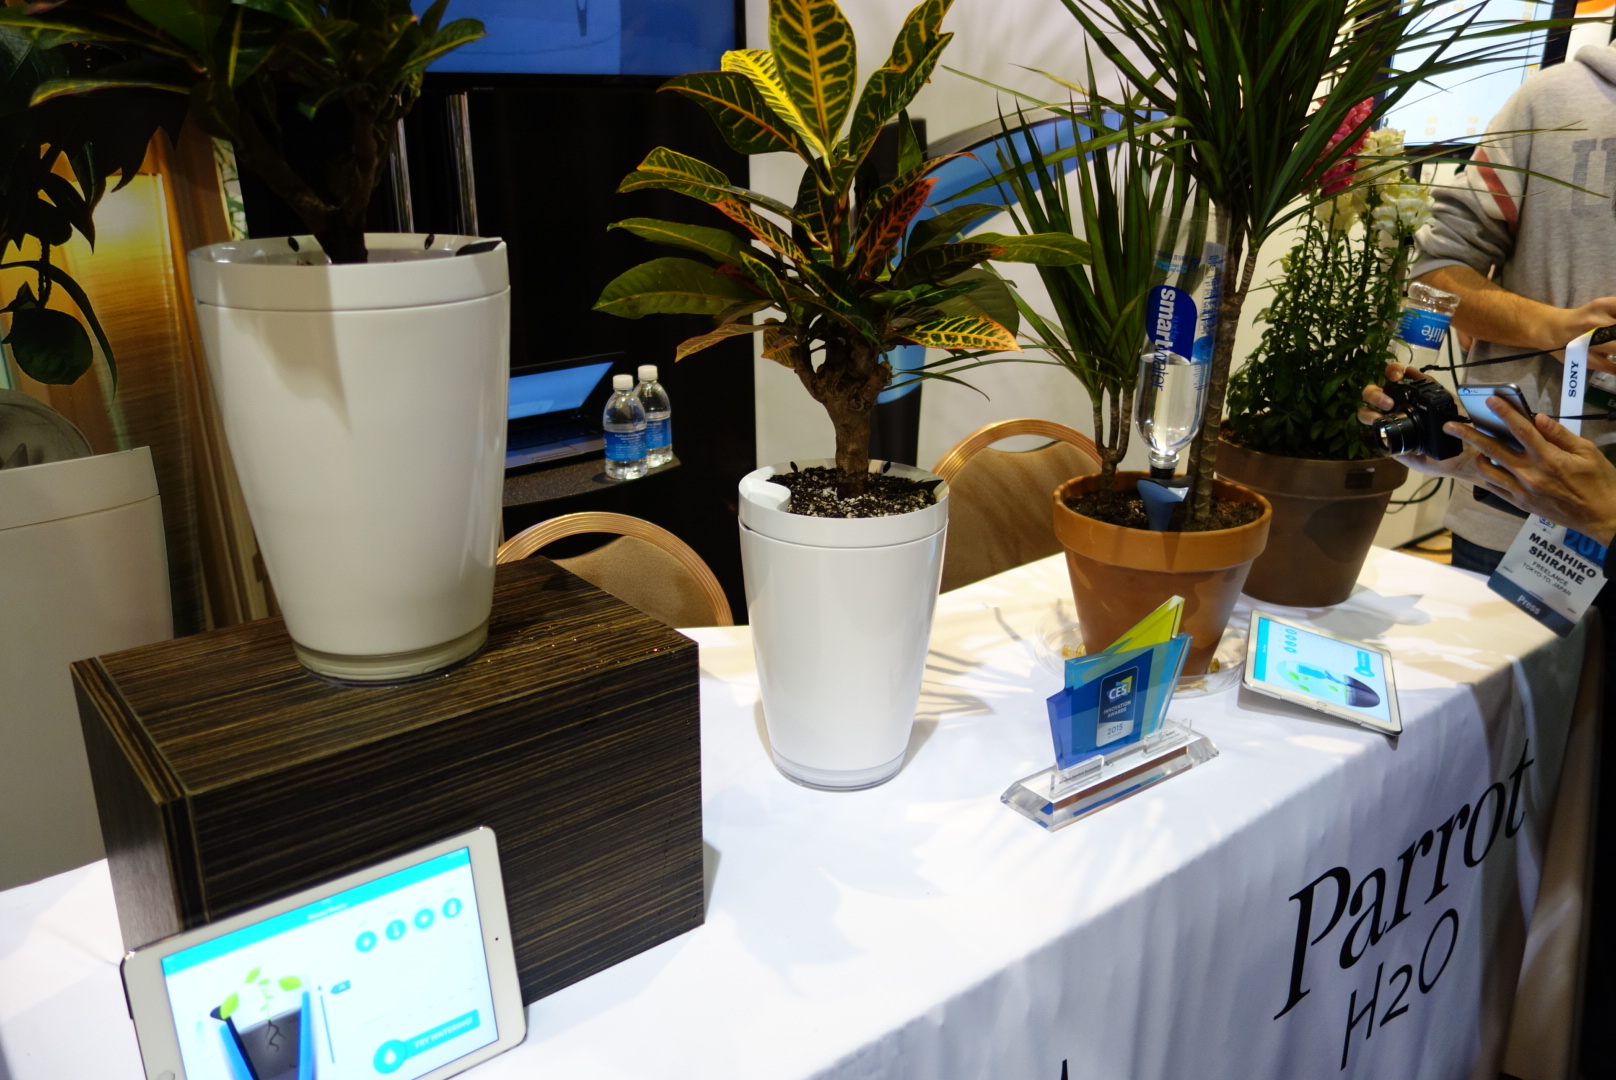 Parrot showed off prototypes of web-connected flower pots and plant-watering devices.